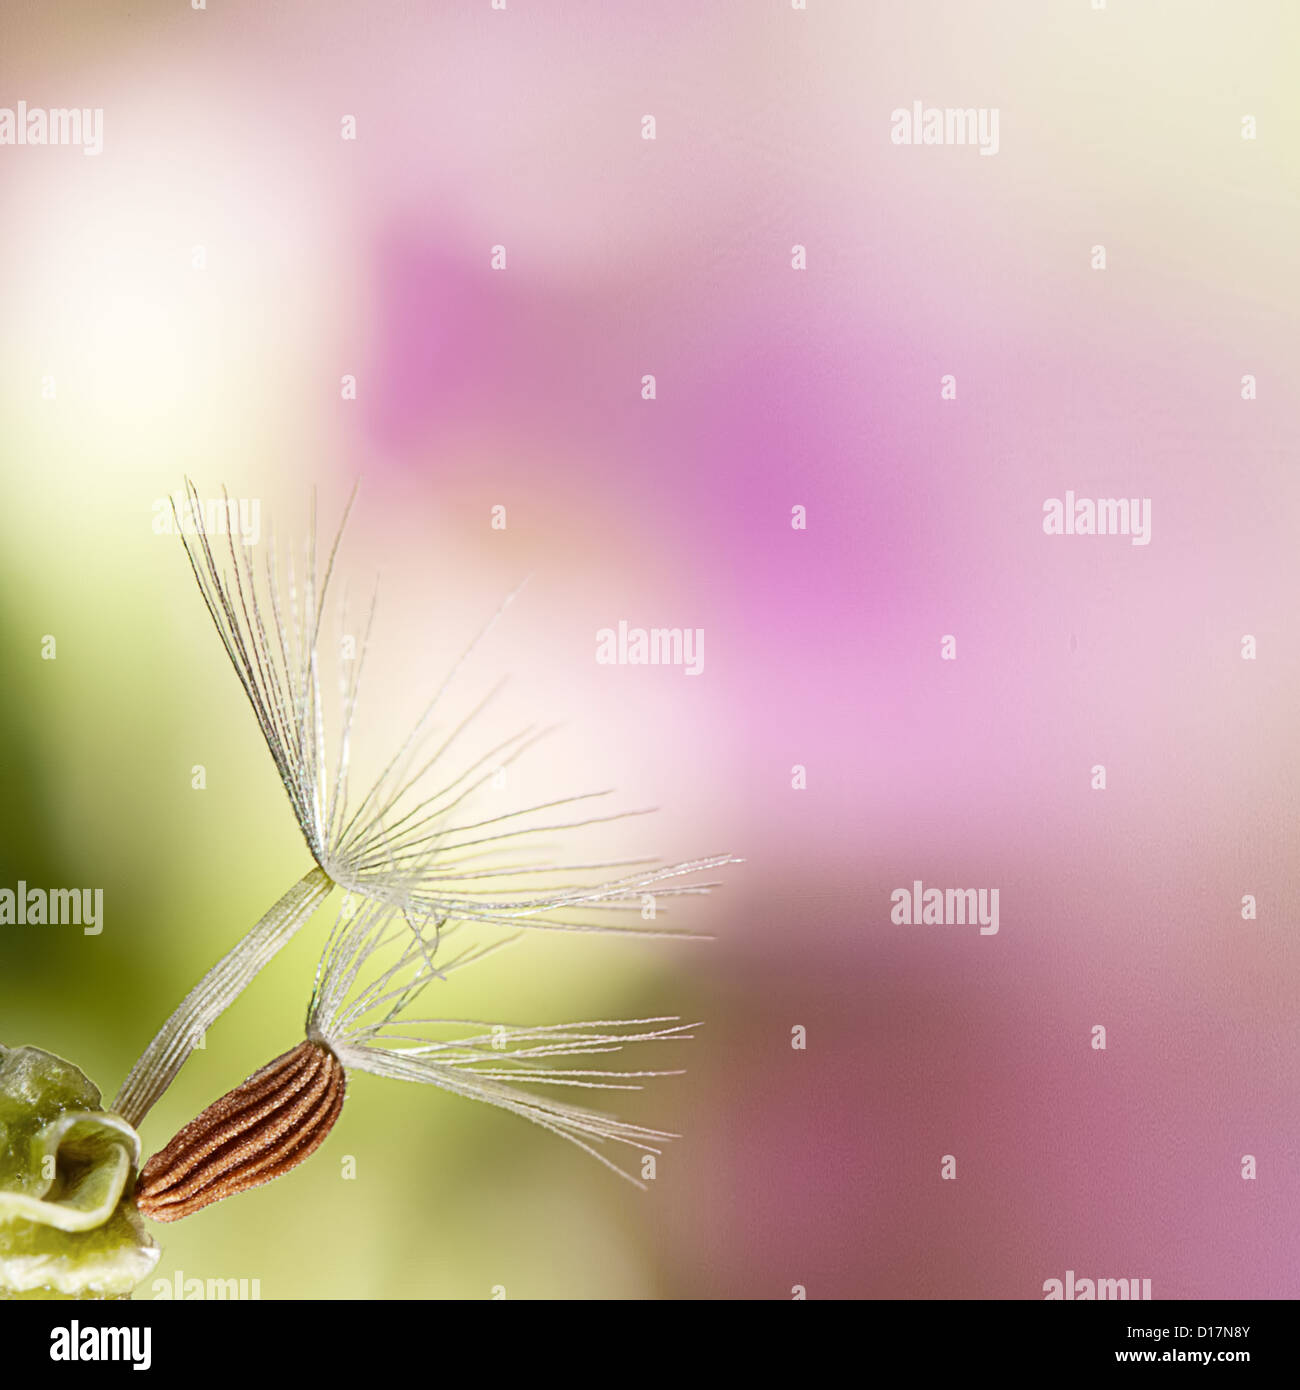 abstract dandelion flower background, extreme closeup with nice background color Stock Photo